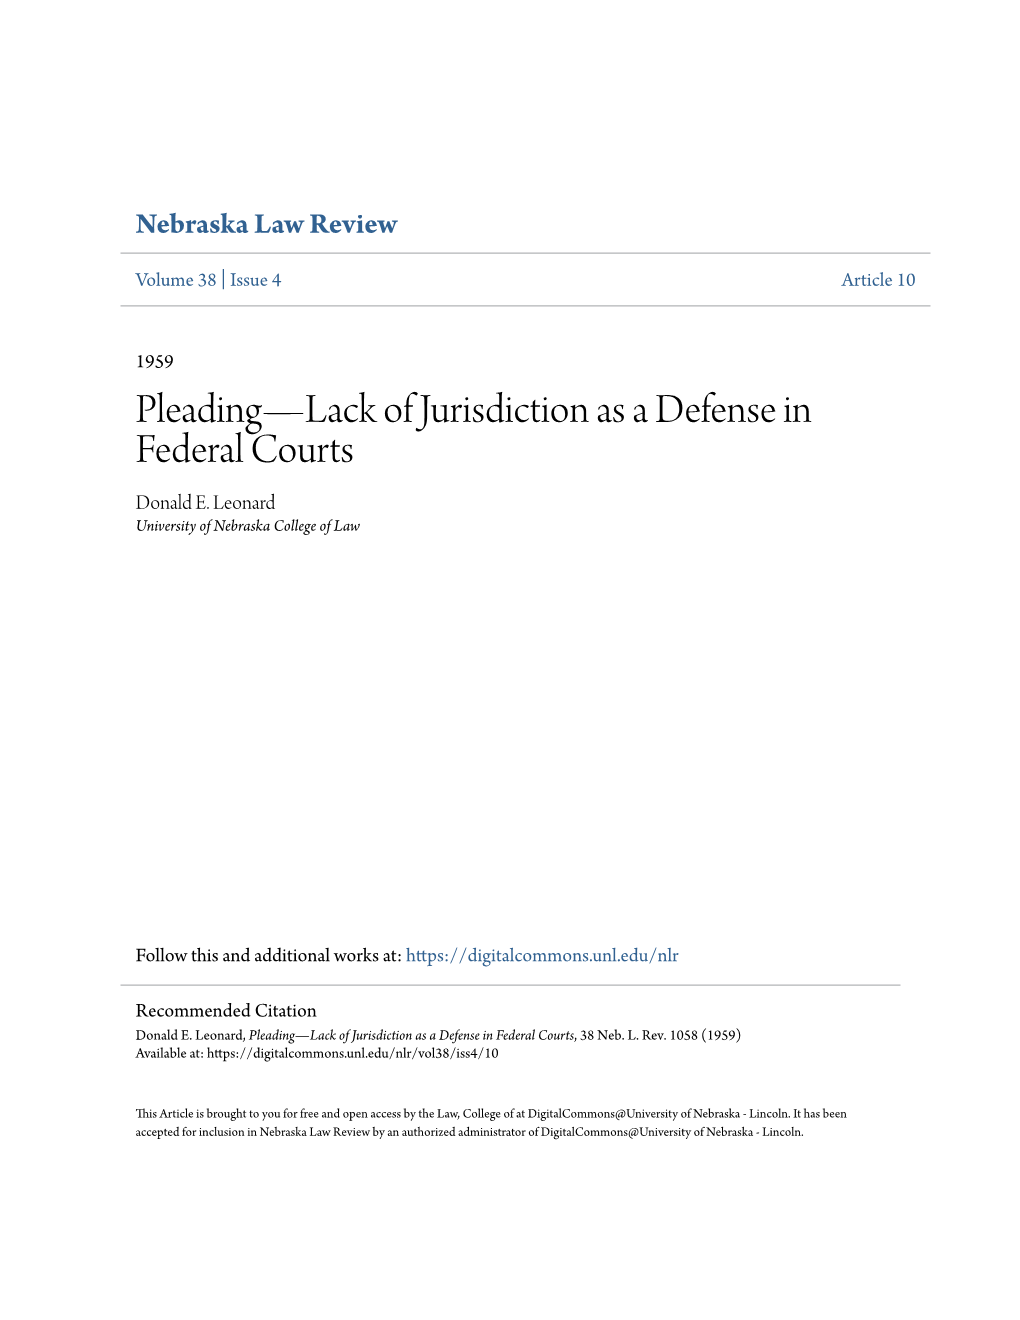 Pleading—Lack of Jurisdiction As a Defense in Federal Courts Donald E